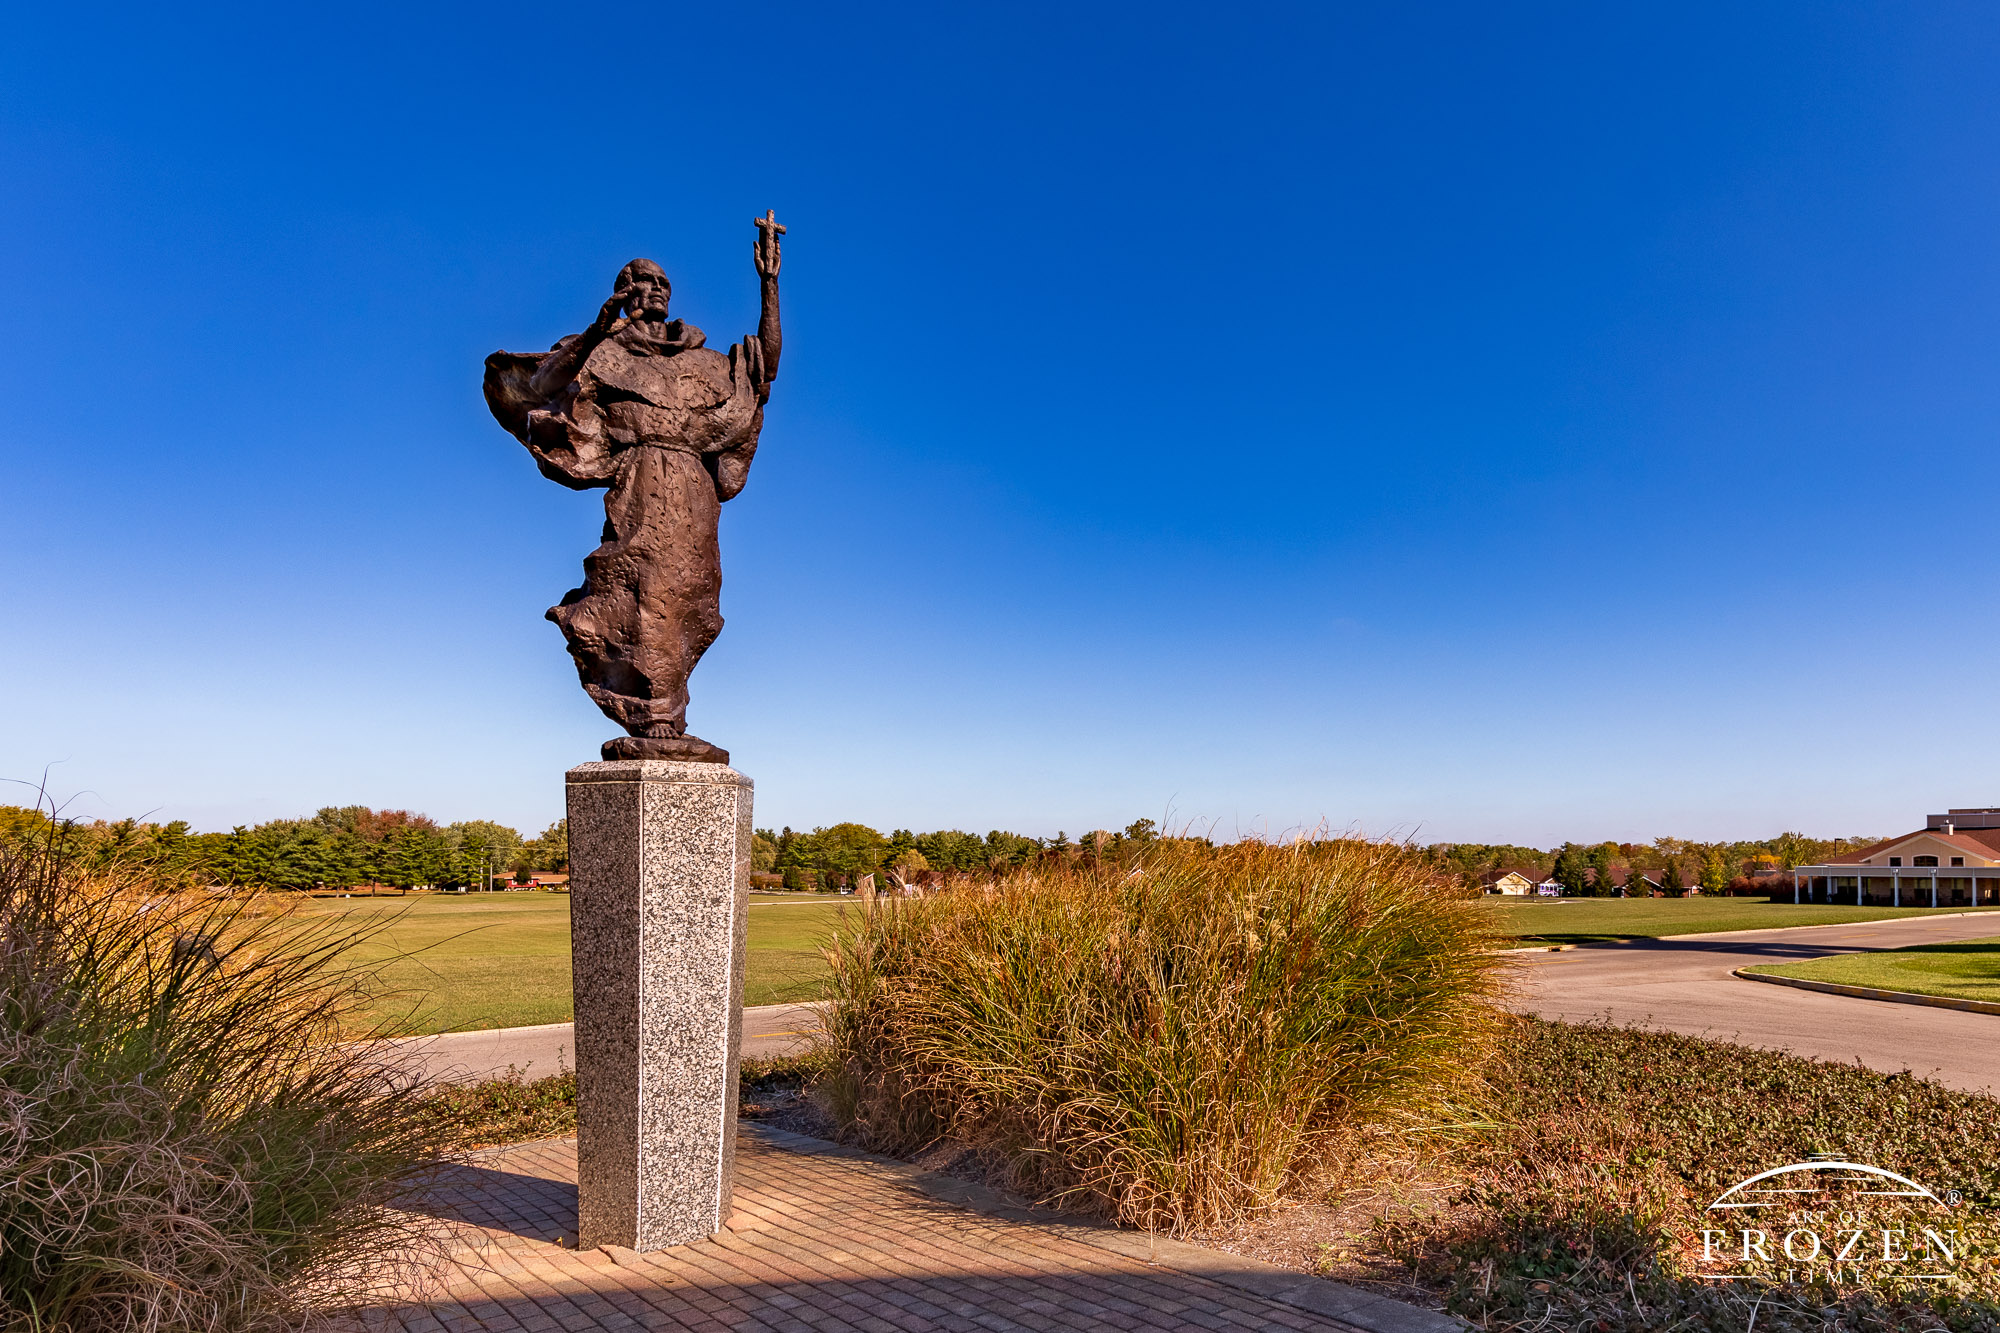 A bronze sculpture of St. Francis of Assisi holding a crucifix while staring skyward which reside under blue azure skies and golden light